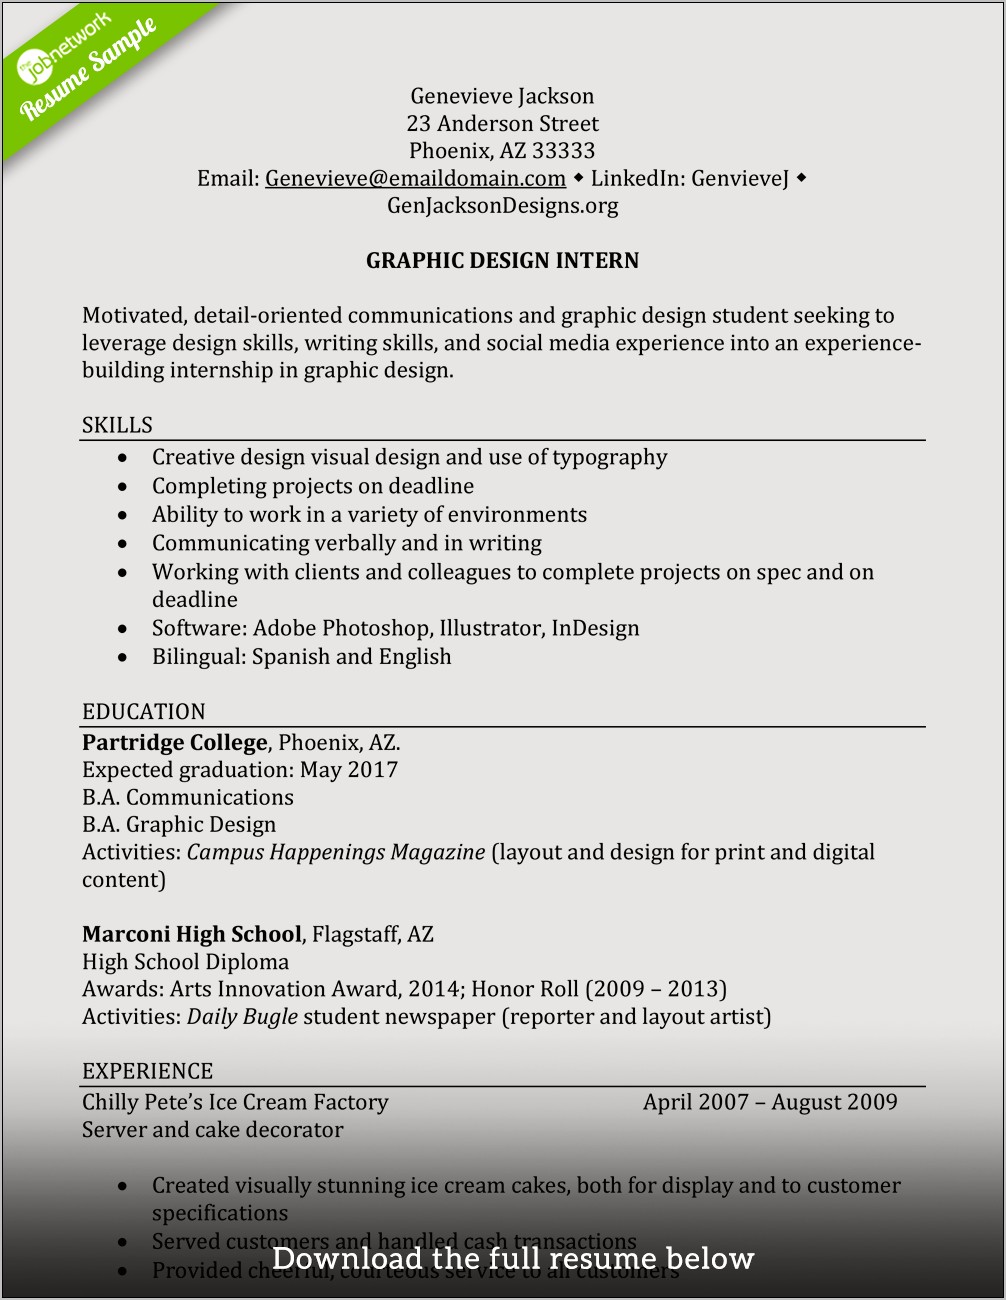 Sample Resume For Student Without Work Experience